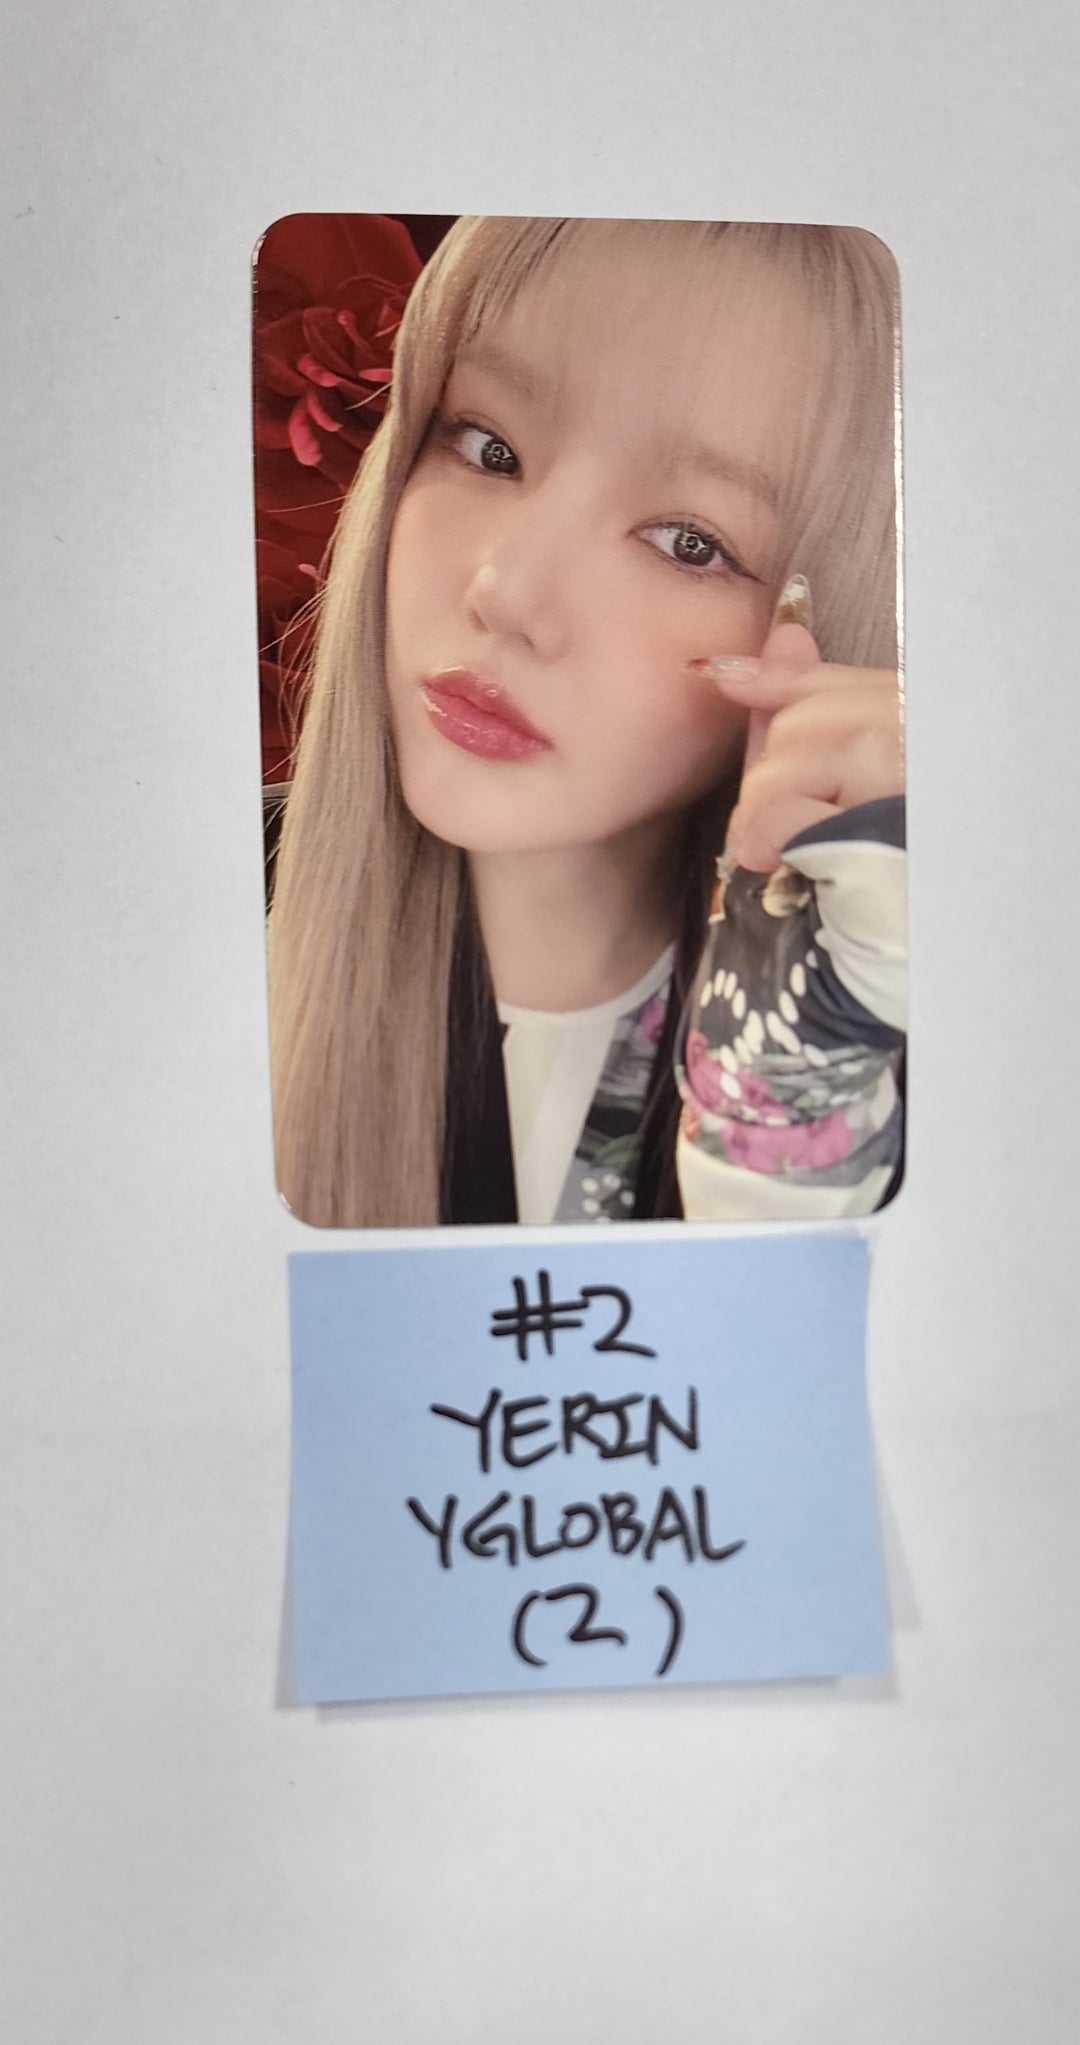 YERIN 'ARIA' 1st Mini - YGLOBAL Fansign Event Photocard